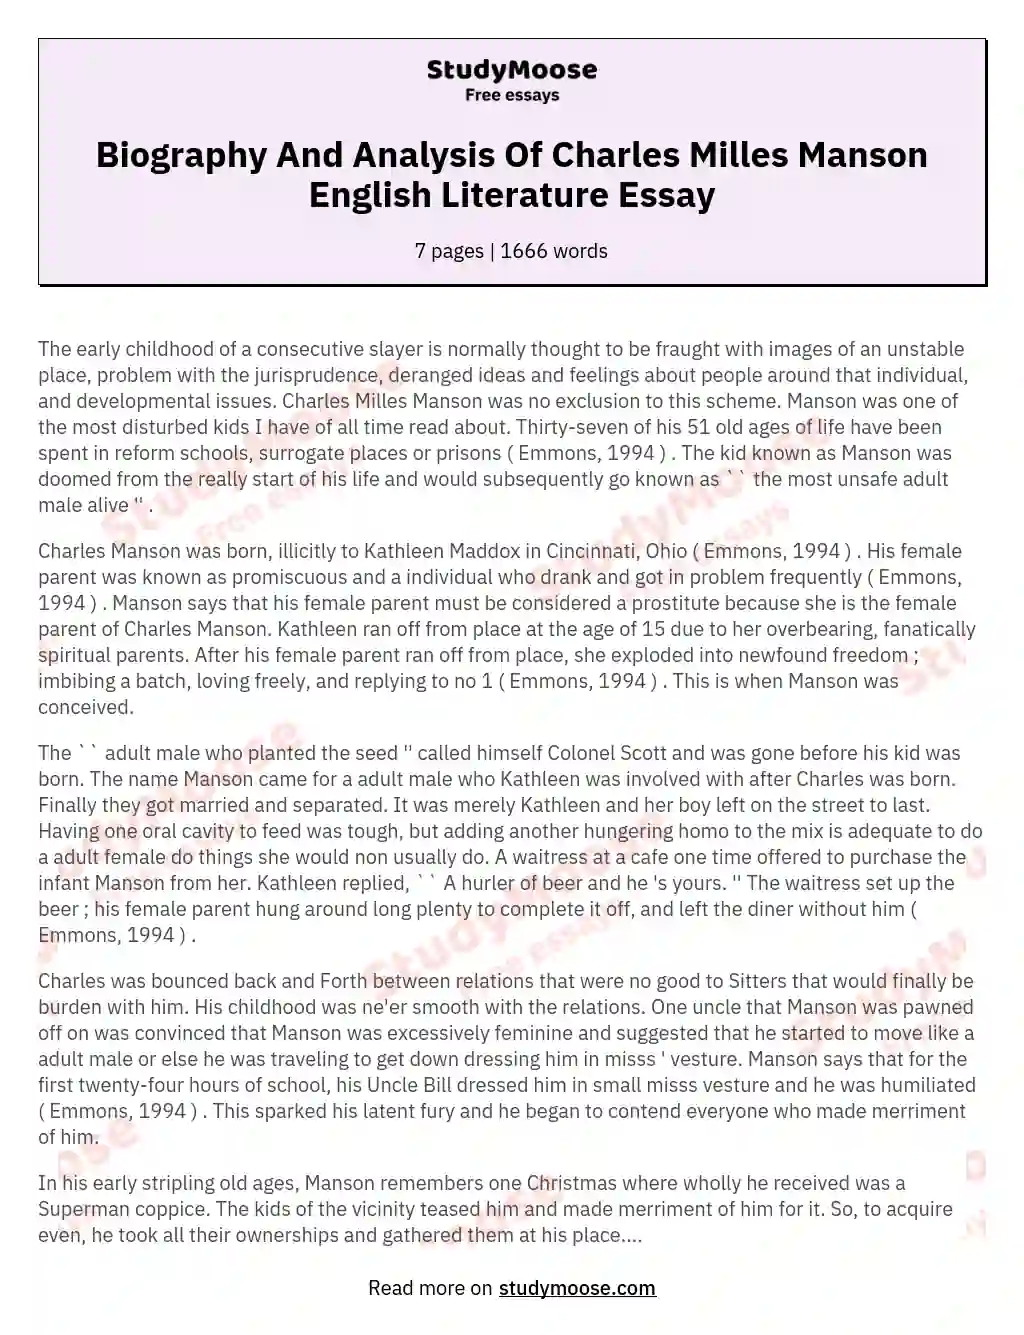 Biography And Analysis Of Charles Milles Manson English Literature Essay